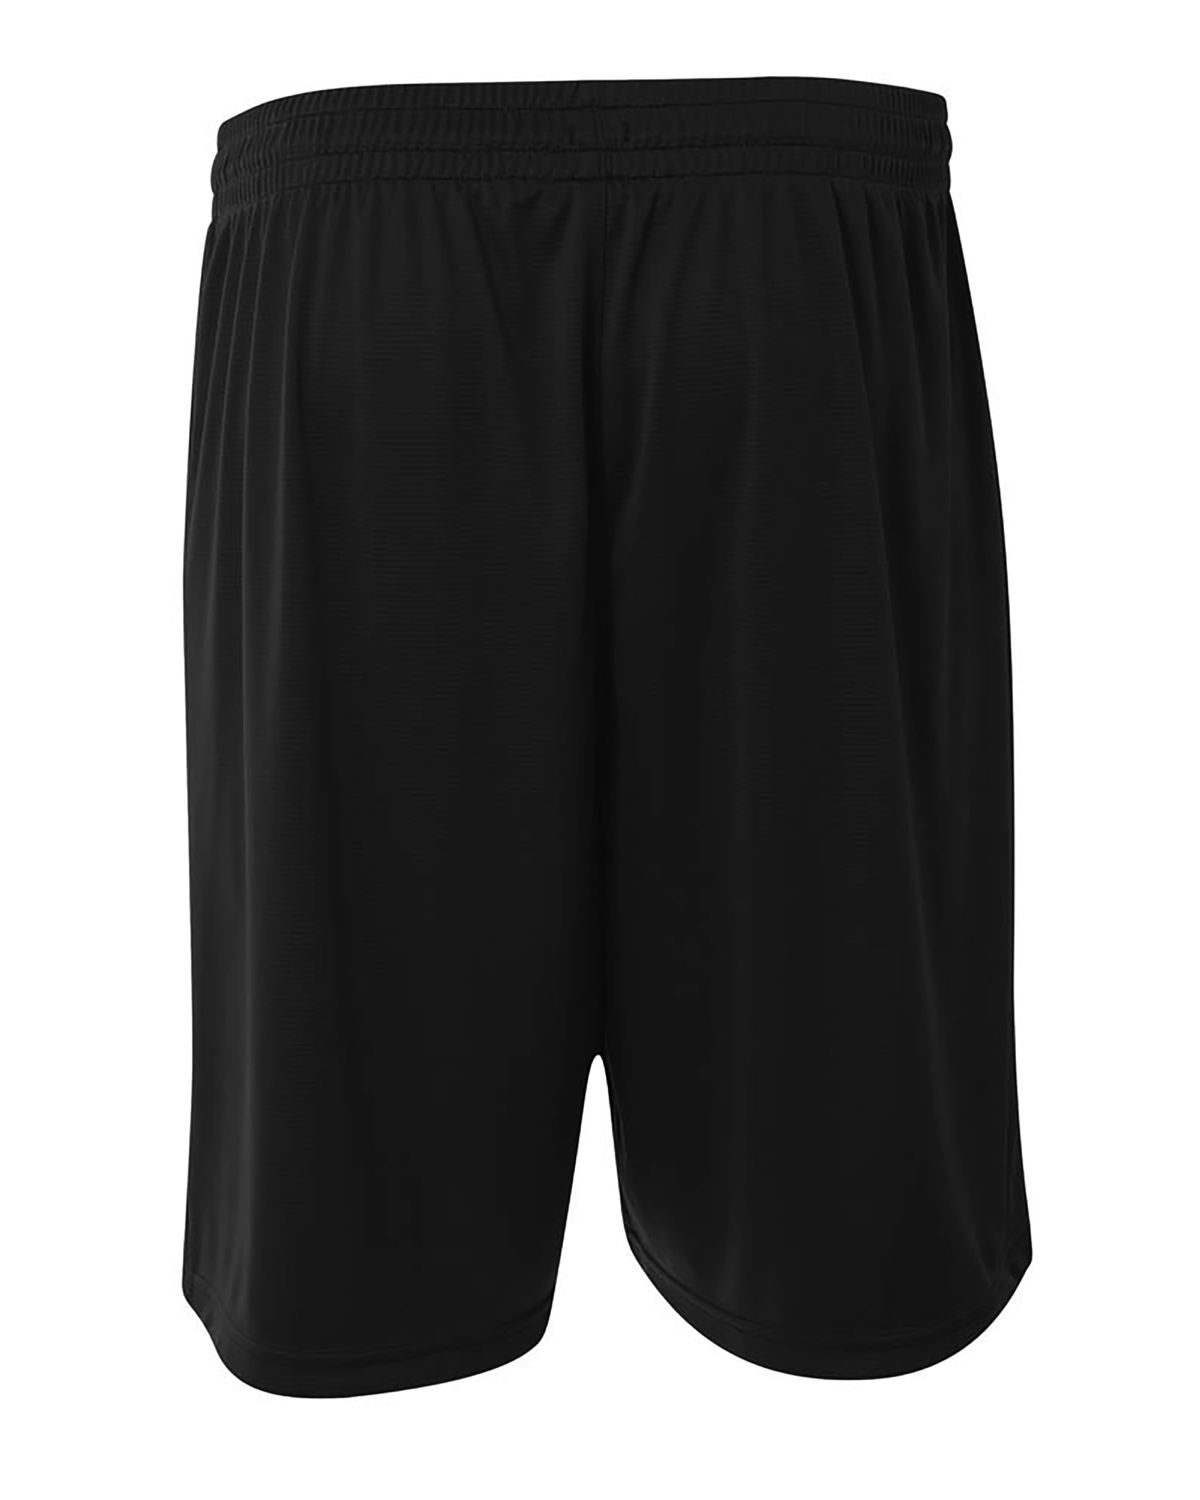 'A4 N5370 Adult Player 10 Pocketed Polyester Short'